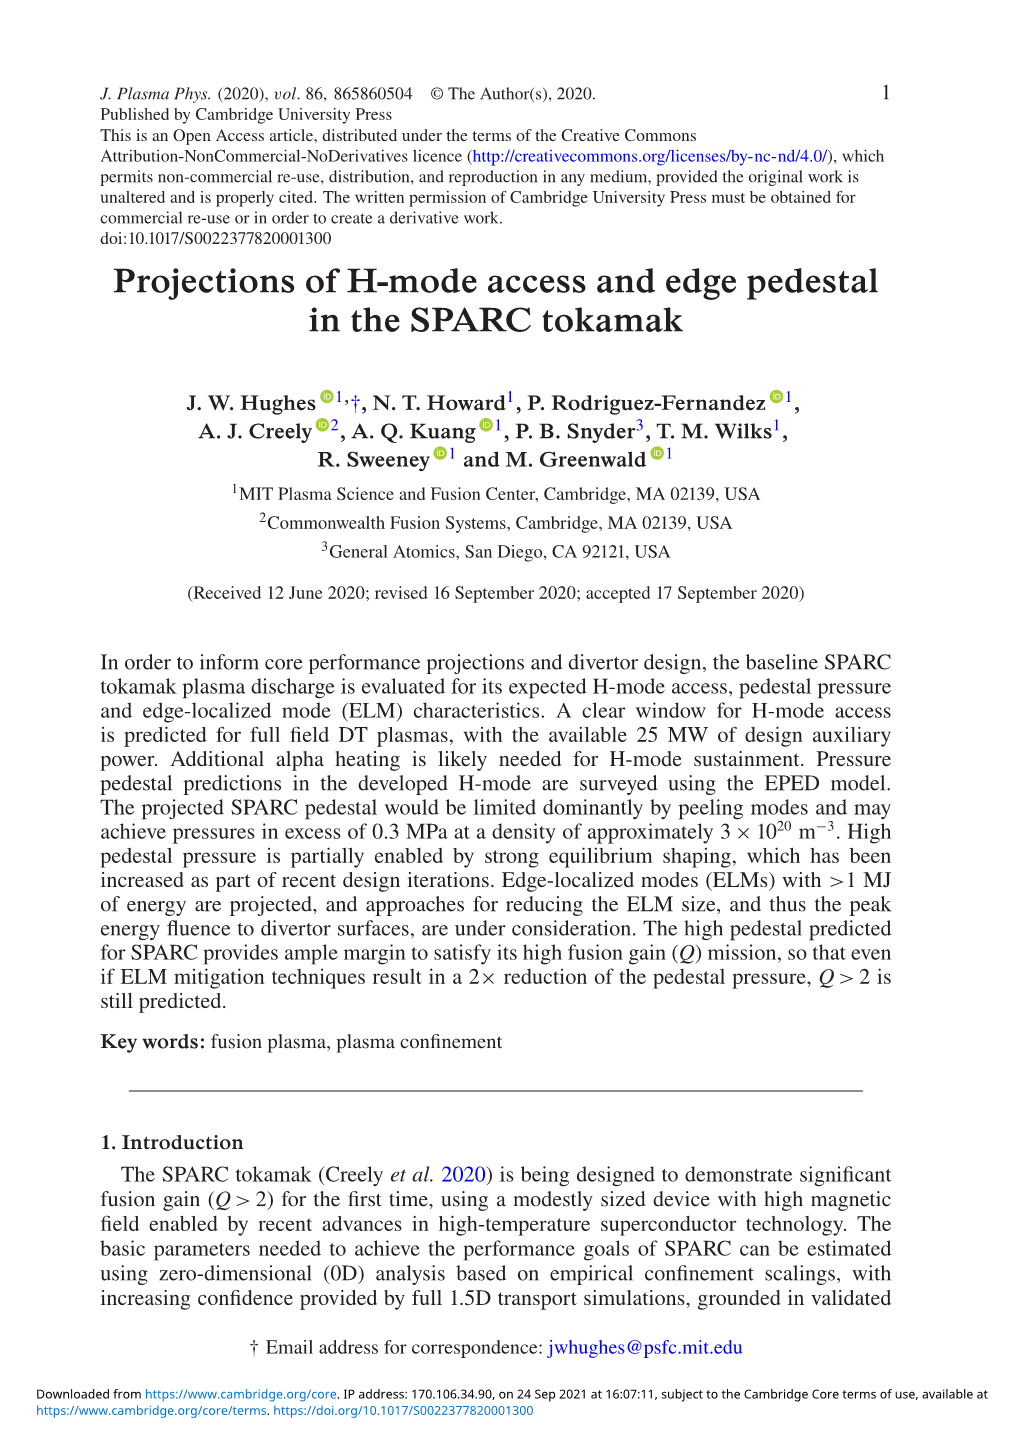 Projections of H-Mode Access and Edge Pedestal in the SPARC Tokamak